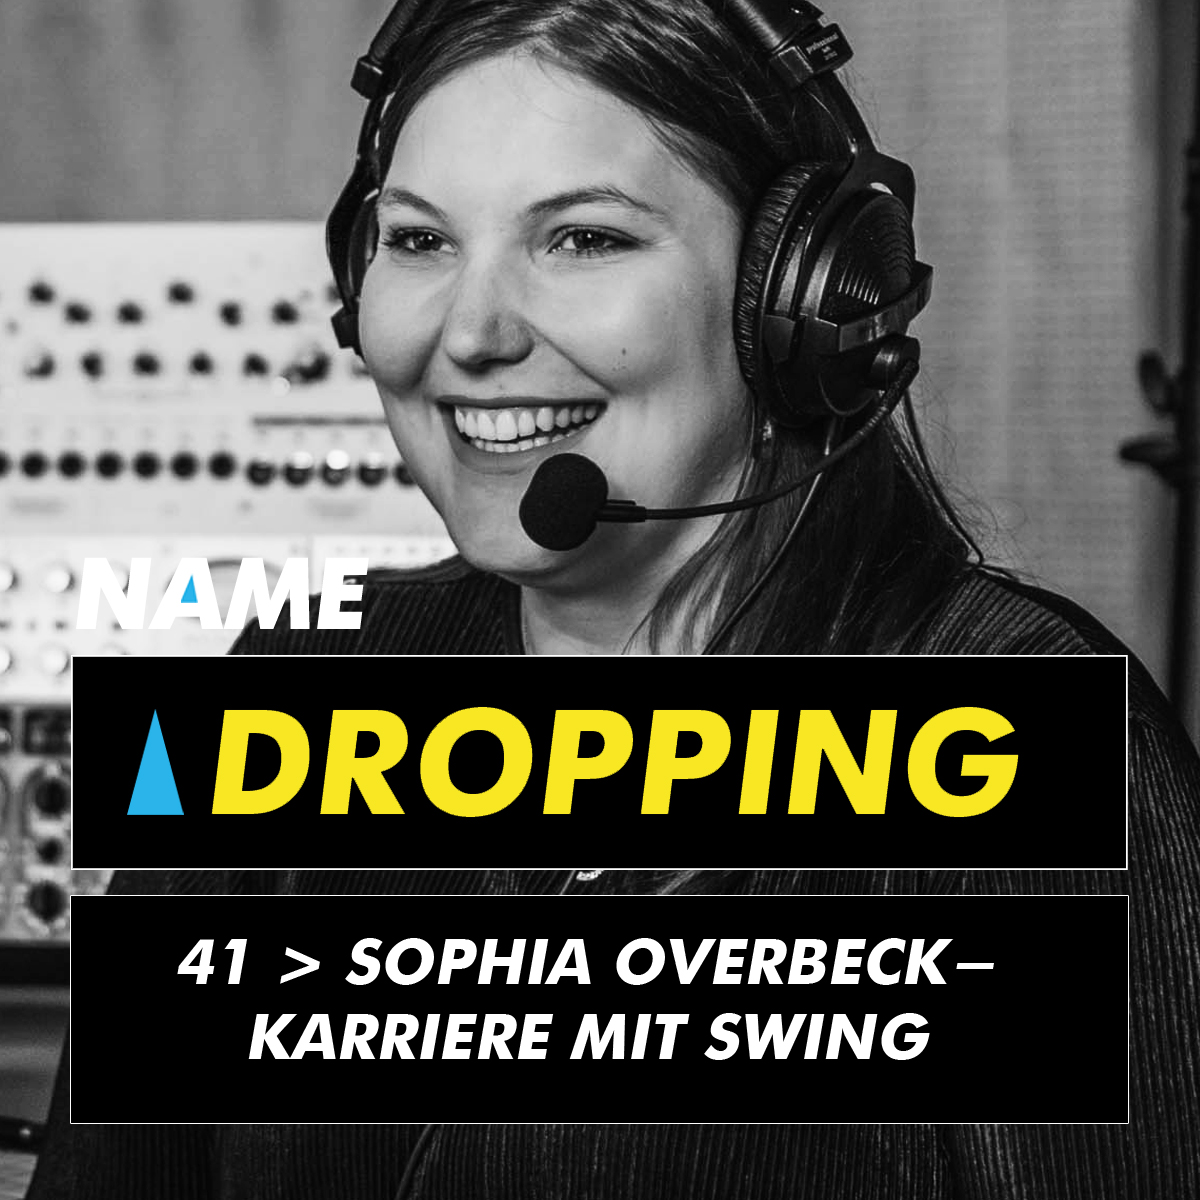 Name Dropping 41 ＞ Sophia Overbeck - Karriere mit Swing